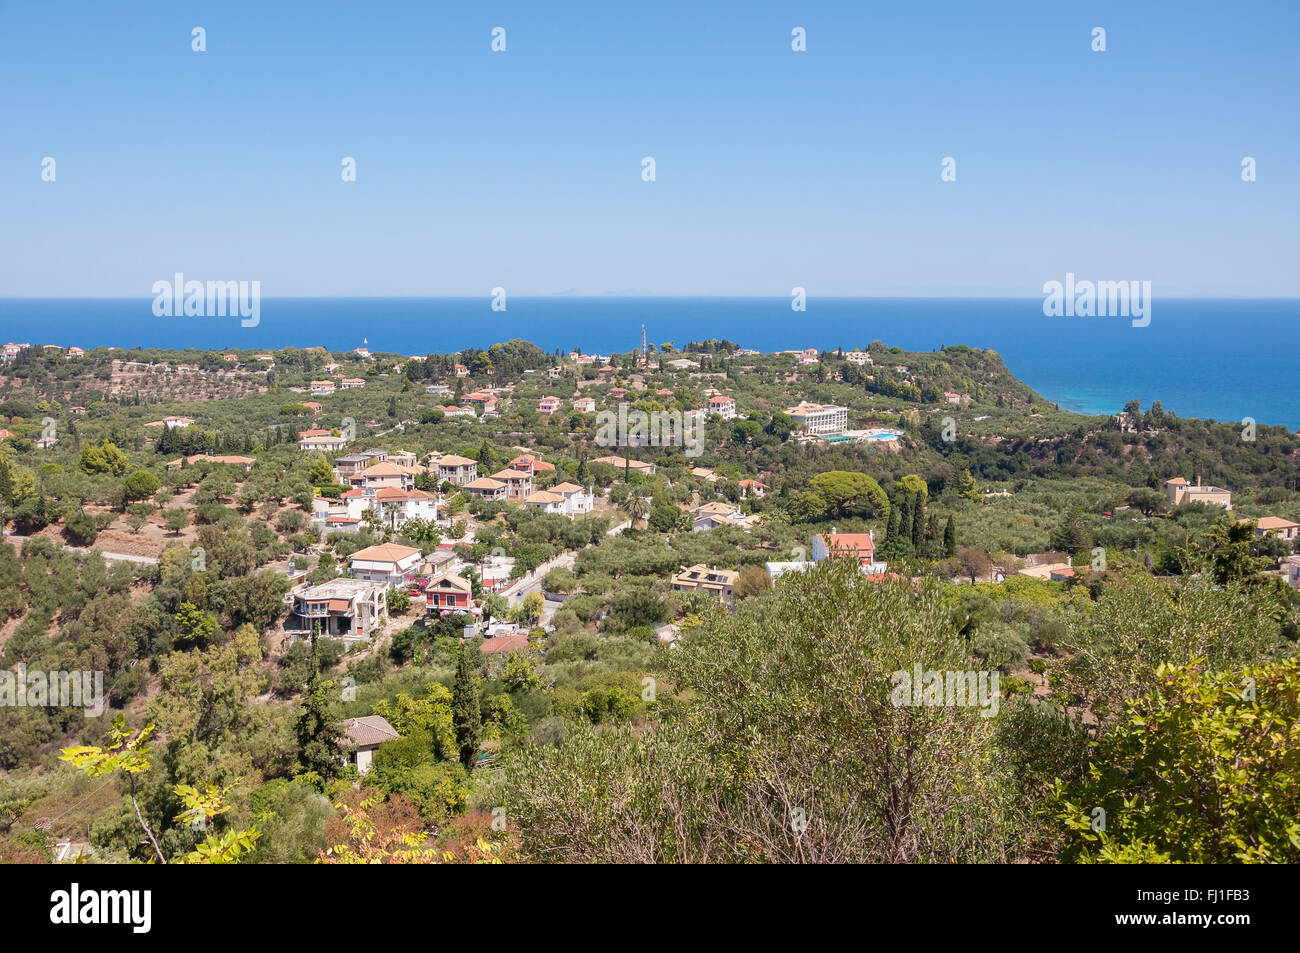 Aerial view of Zakynthos Island from the Bohali Castle, Greece Stock Photo